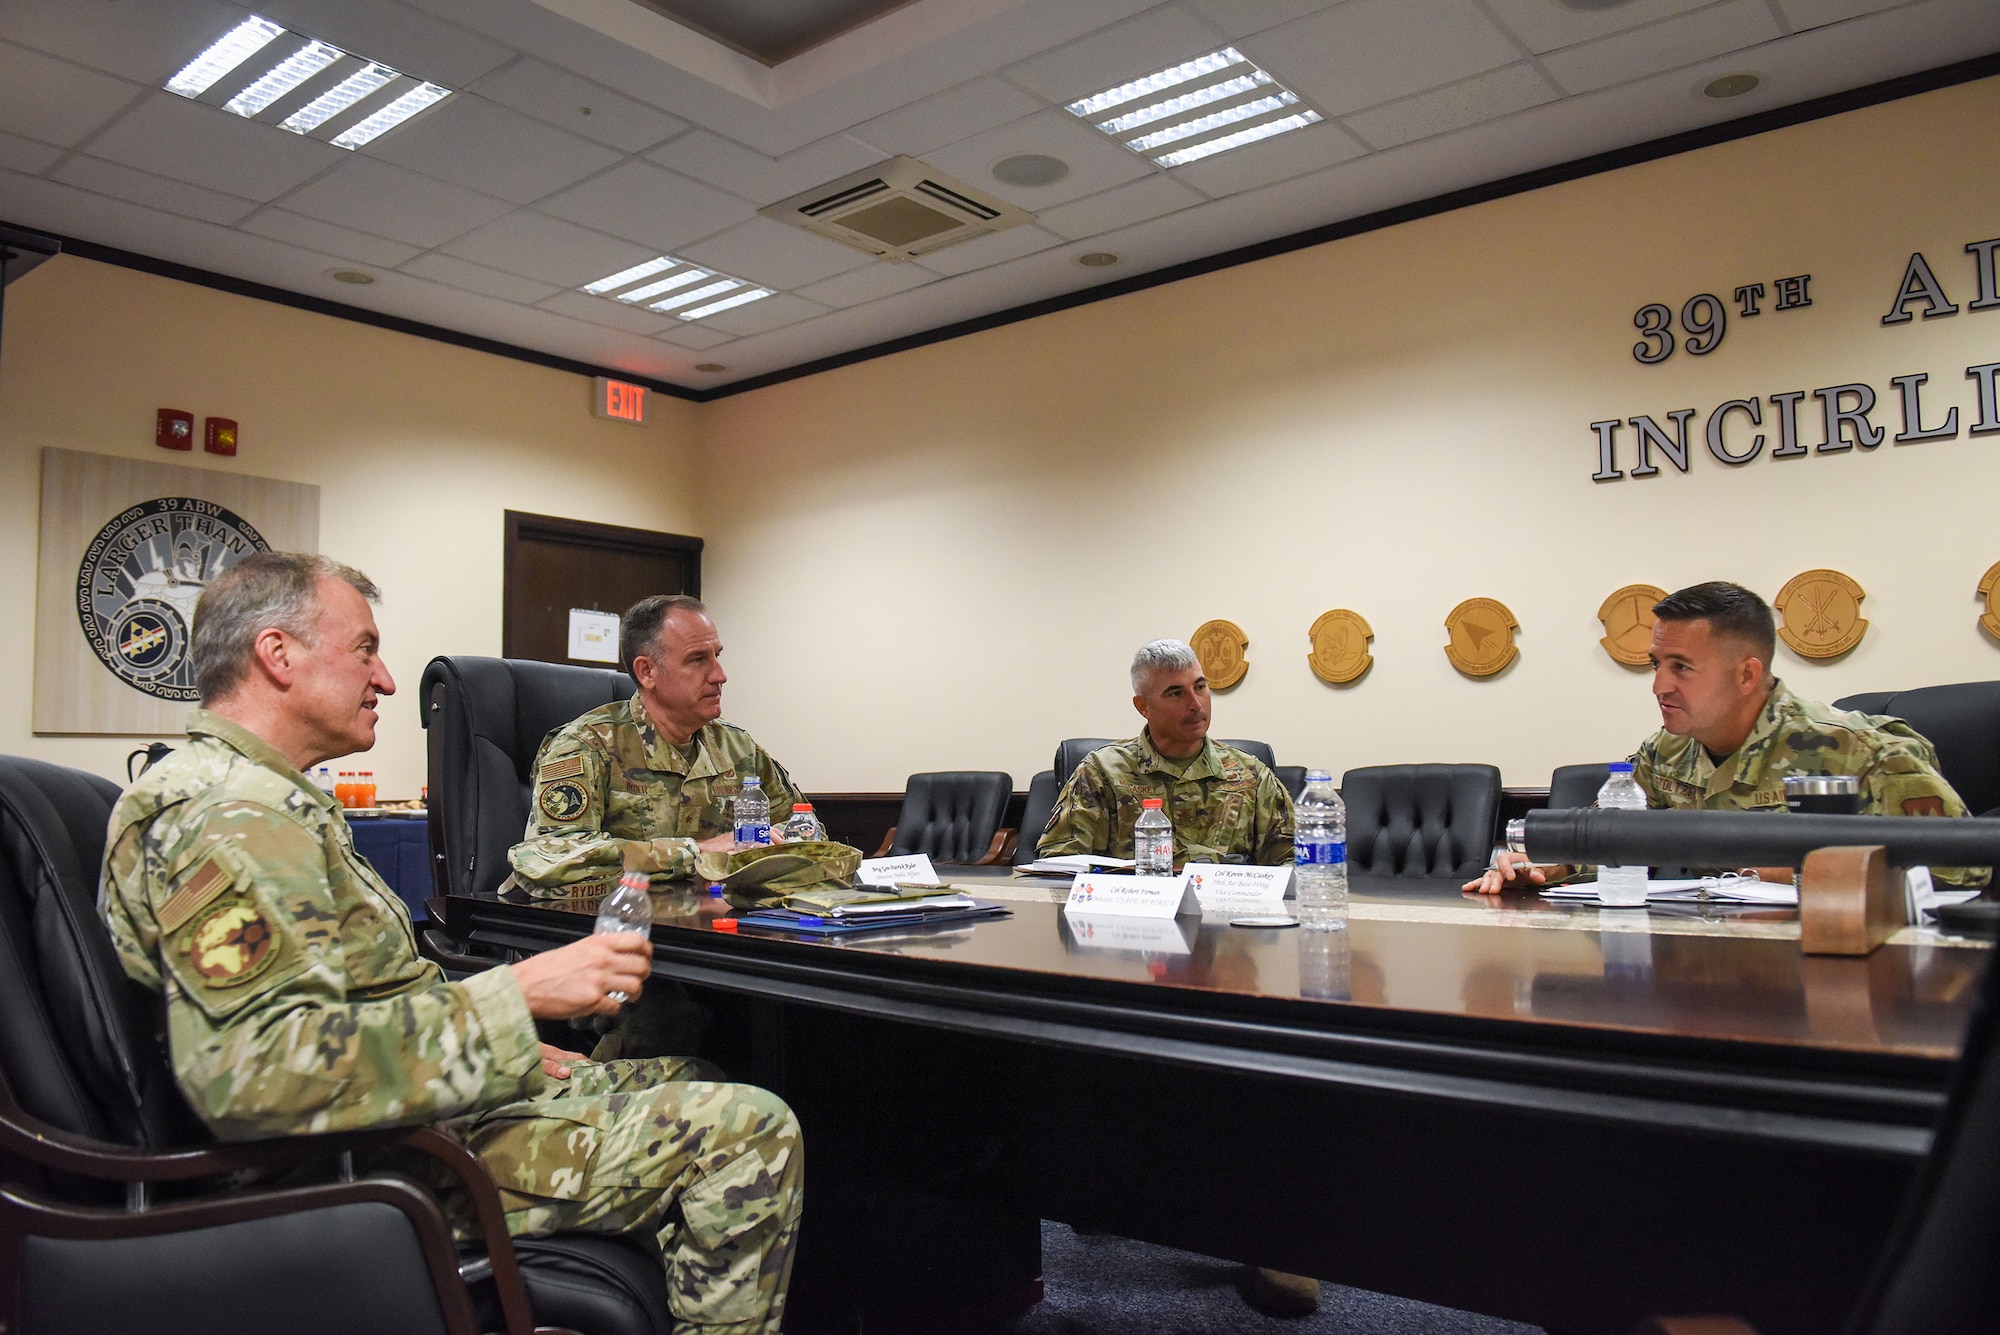 Col. Robert Firman (left), U.S. Air Forces in Europe-Air Forces Africa director of public affairs, and Brig. Gen. Patrick Ryder (left center), Office of the Secretary of the Air Force director of PA, meet with Col. Kevin McCaskey (right center), 39th Air Base Wing vice commander, and Chief Master Sgt. Justin Stoltzus, 39th ABW command chief, during a visit on Incirlik Air Base, Turkey, Aug. 4, 2022.